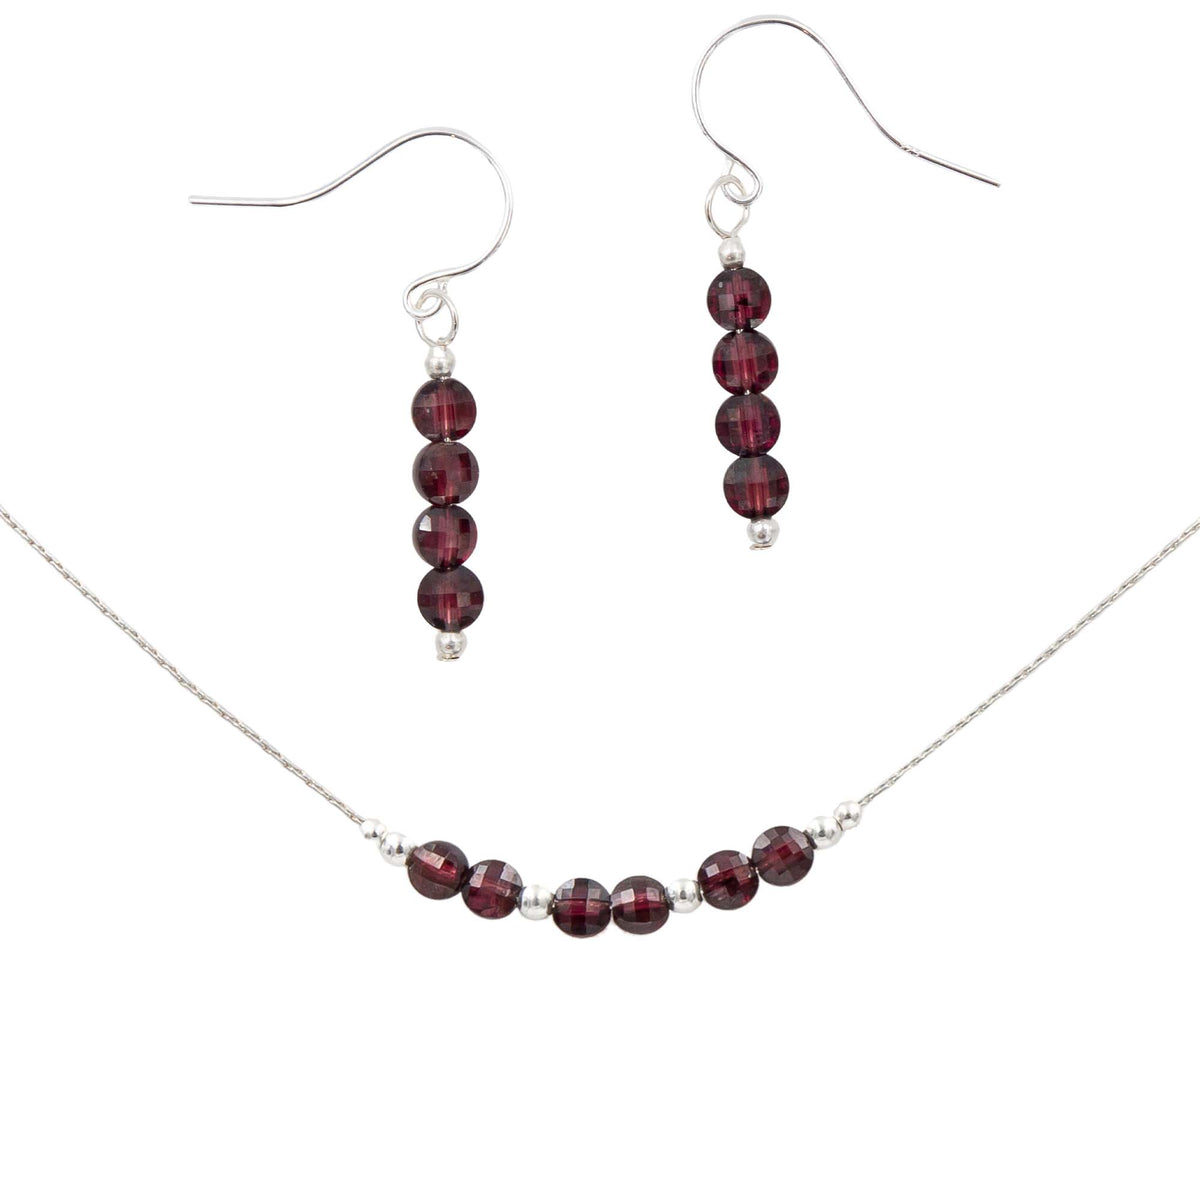 Earth Song Jewelry ~ Petite Red Garnets with Silver Beads ~ Sterling Silver Handmade Earrings &amp; Necklace Set